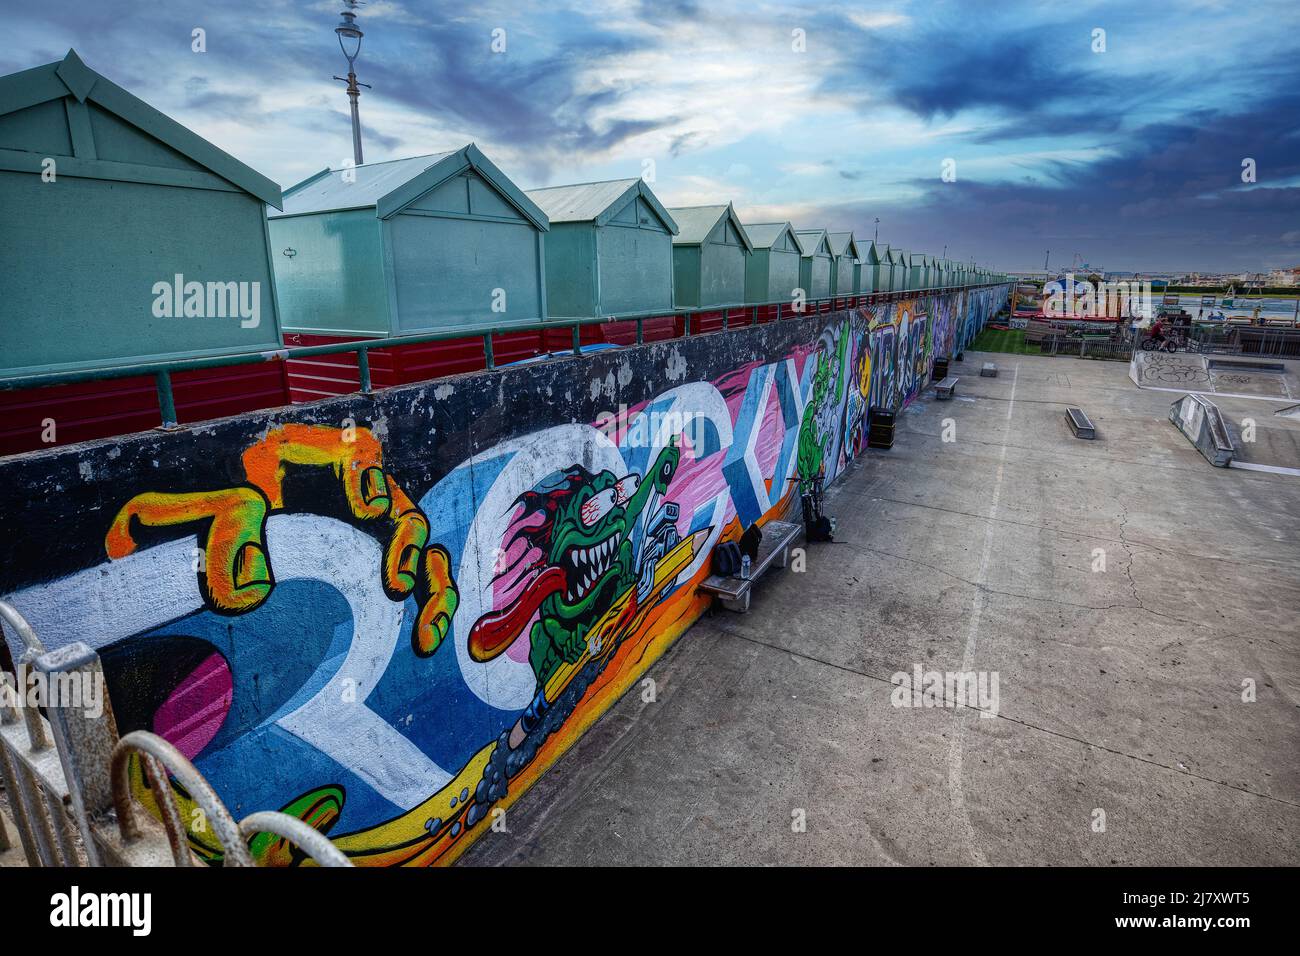 The skate park at The Big Beach Cafe owned by Fat Boy Slim (Norman Cook) on Hove seafront with the beach huts and colourful street art Stock Photo